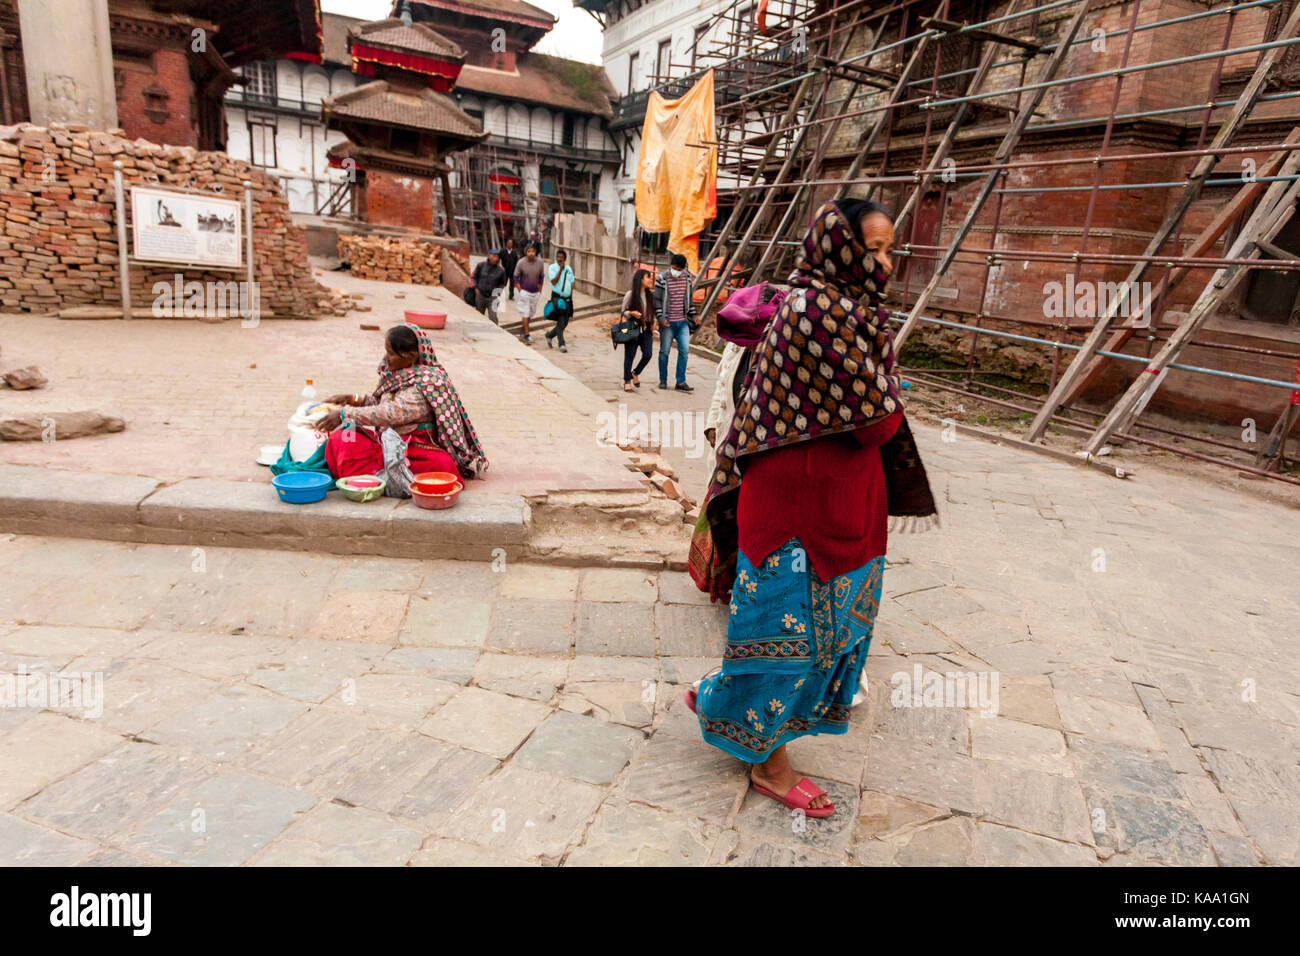 Nepali vendors on the street in Kathmandu, Nepal. Often to see the people working on the street, as in Nepal. Stock Photo